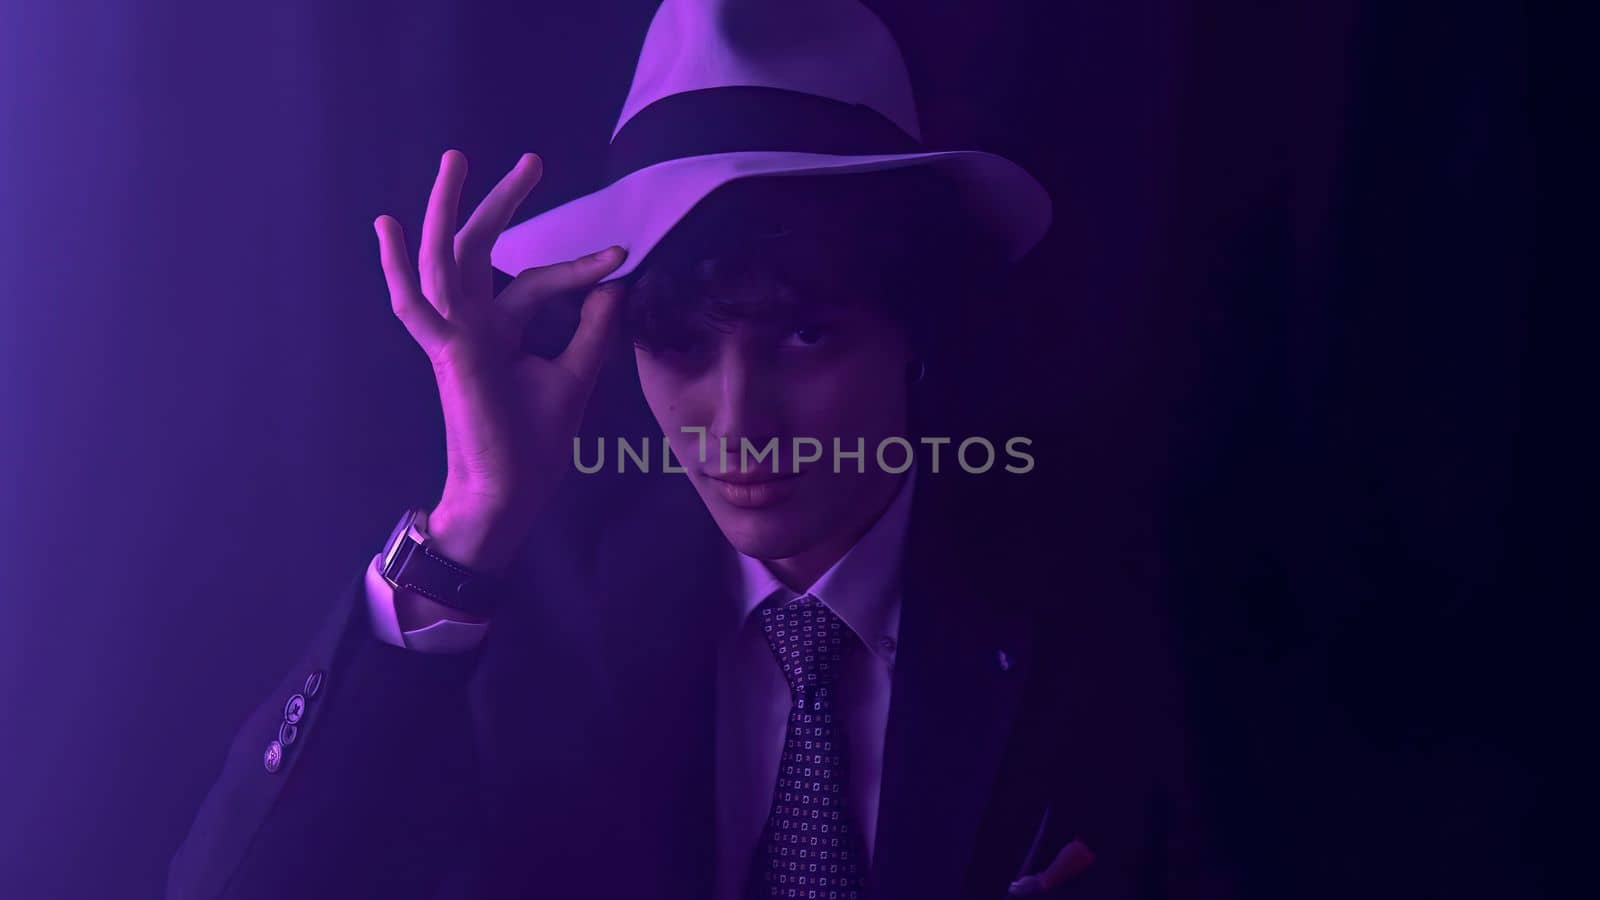 A handsome, curly haired man strikes a playful pose as he dances in a sleek black suit. Touching his a cowboy hat and a mischievous wink towards the camera. Against a dramatic, dark background.